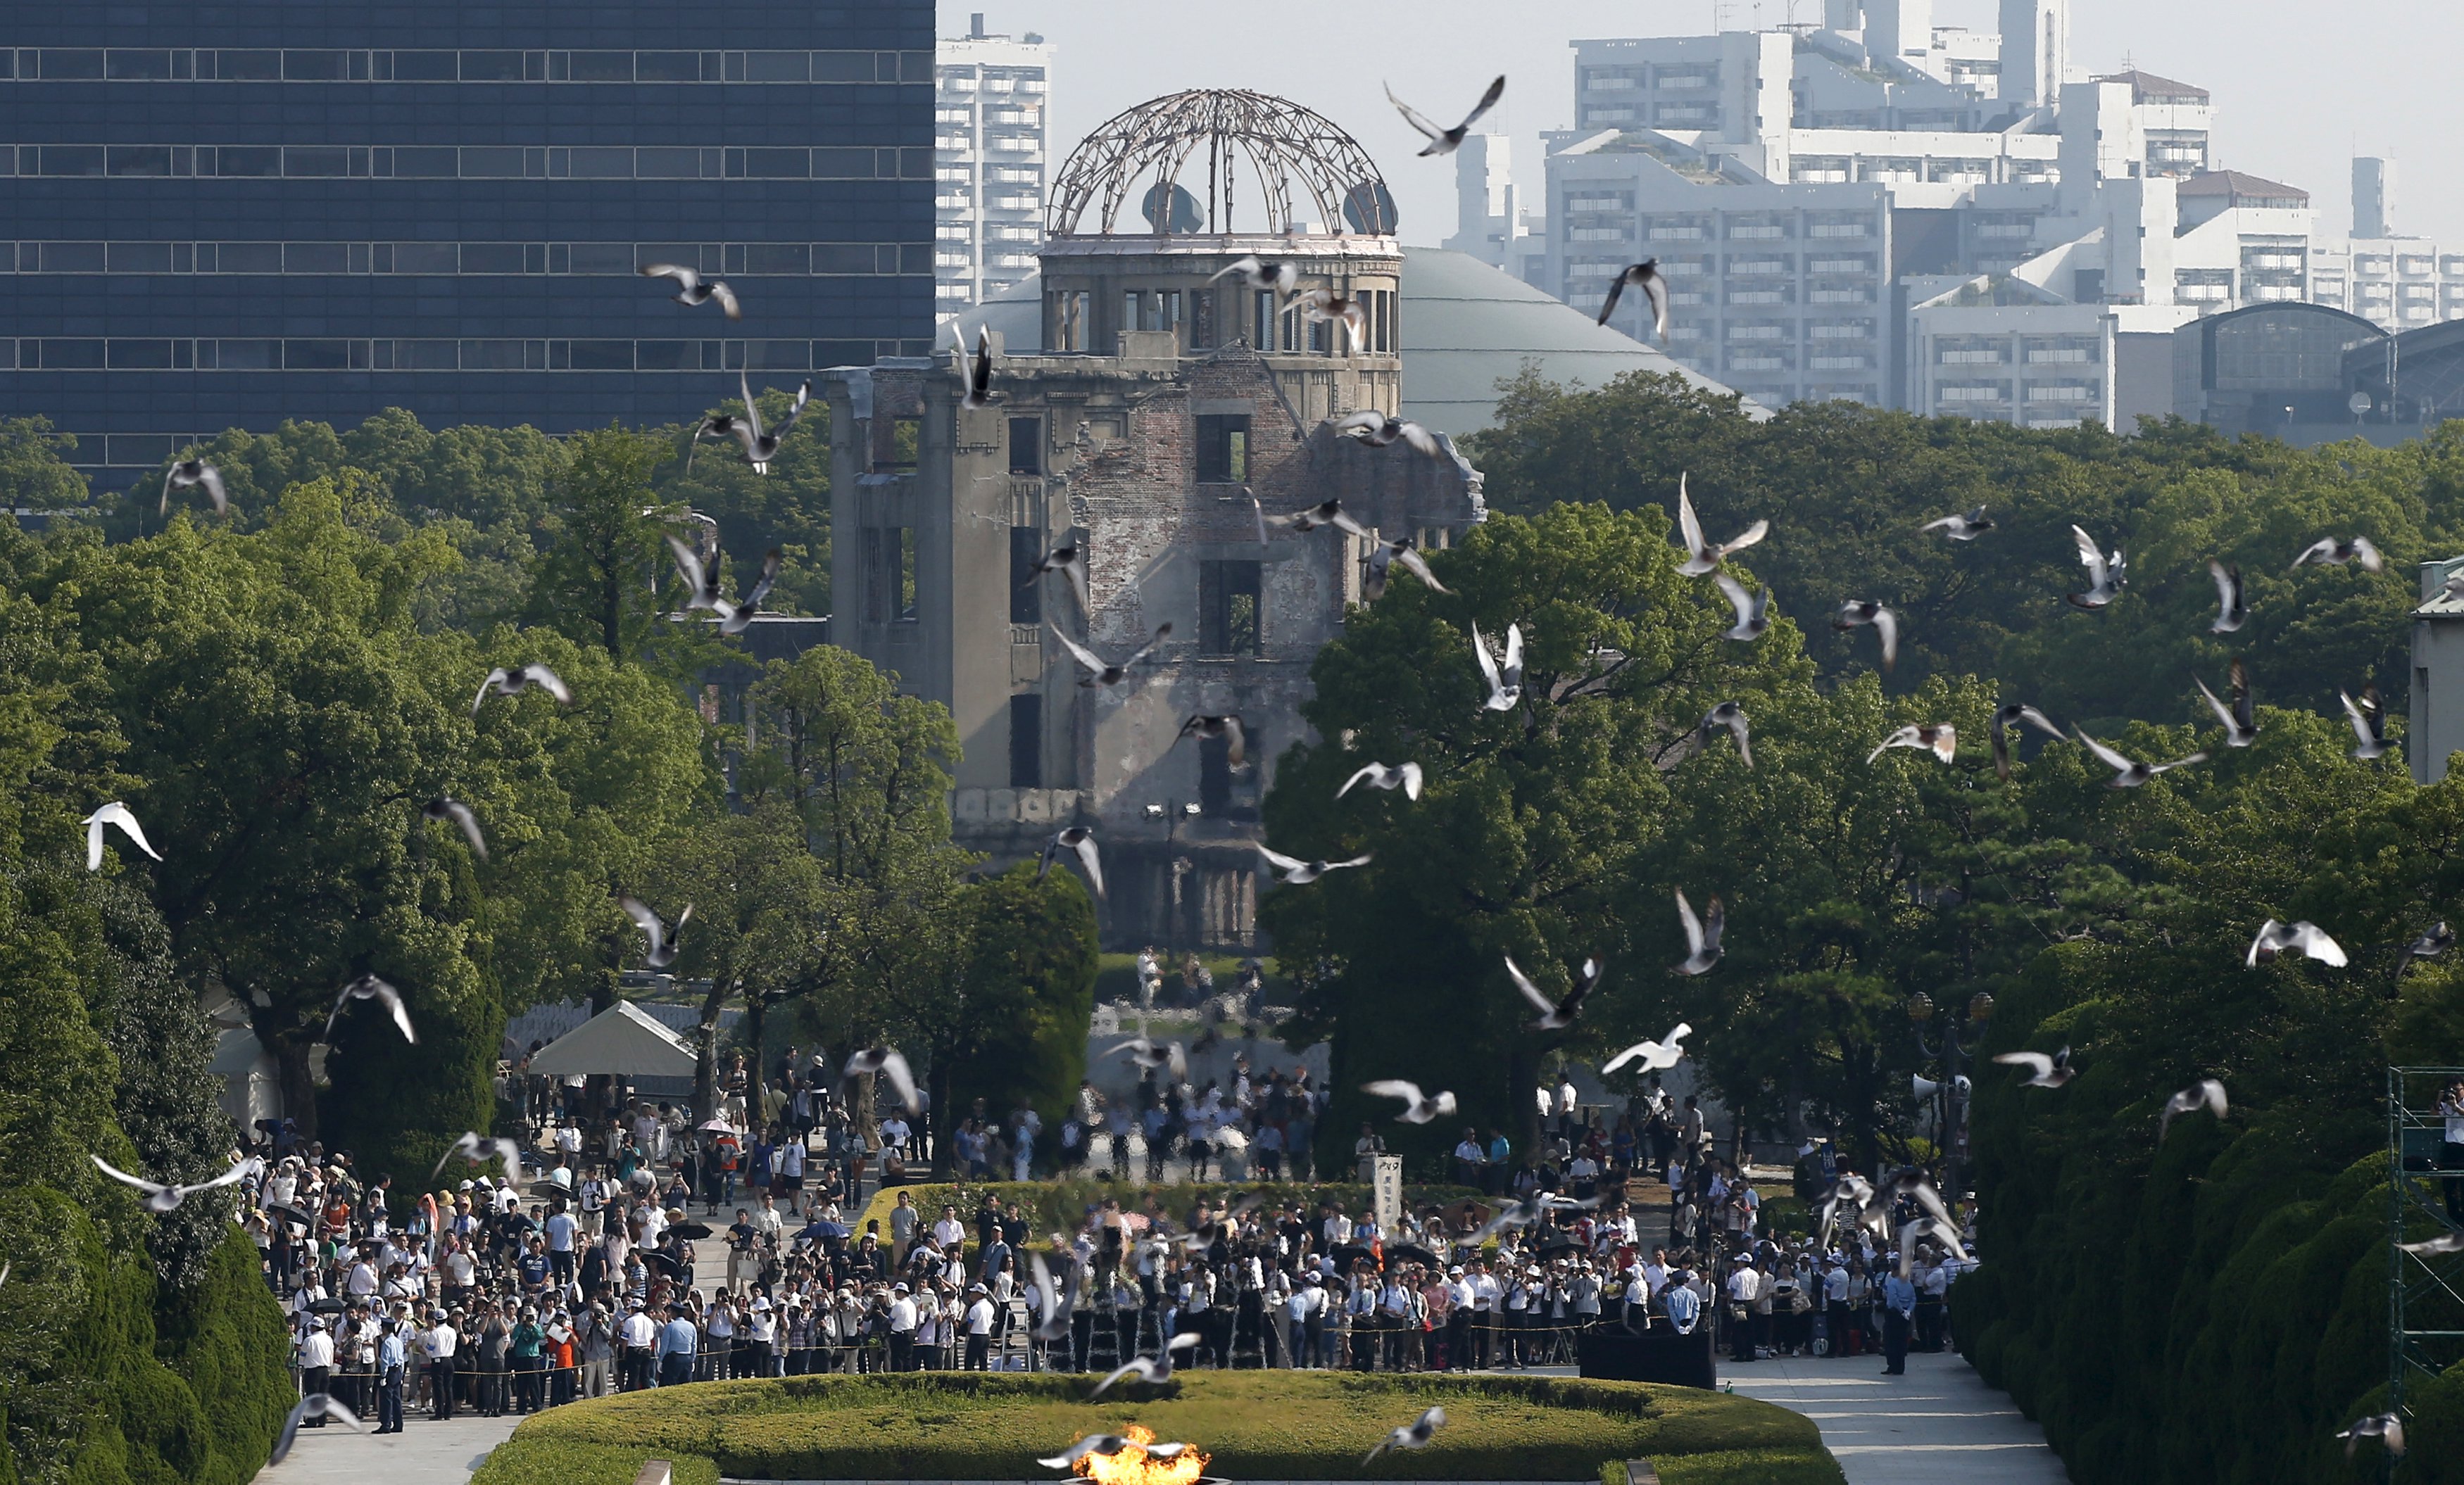 Doves fly over Peace Memorial Park, with the Atomic Bomb Dome in the background, during the annual ceremony in Hiroshima on Thursday. | REUTERS